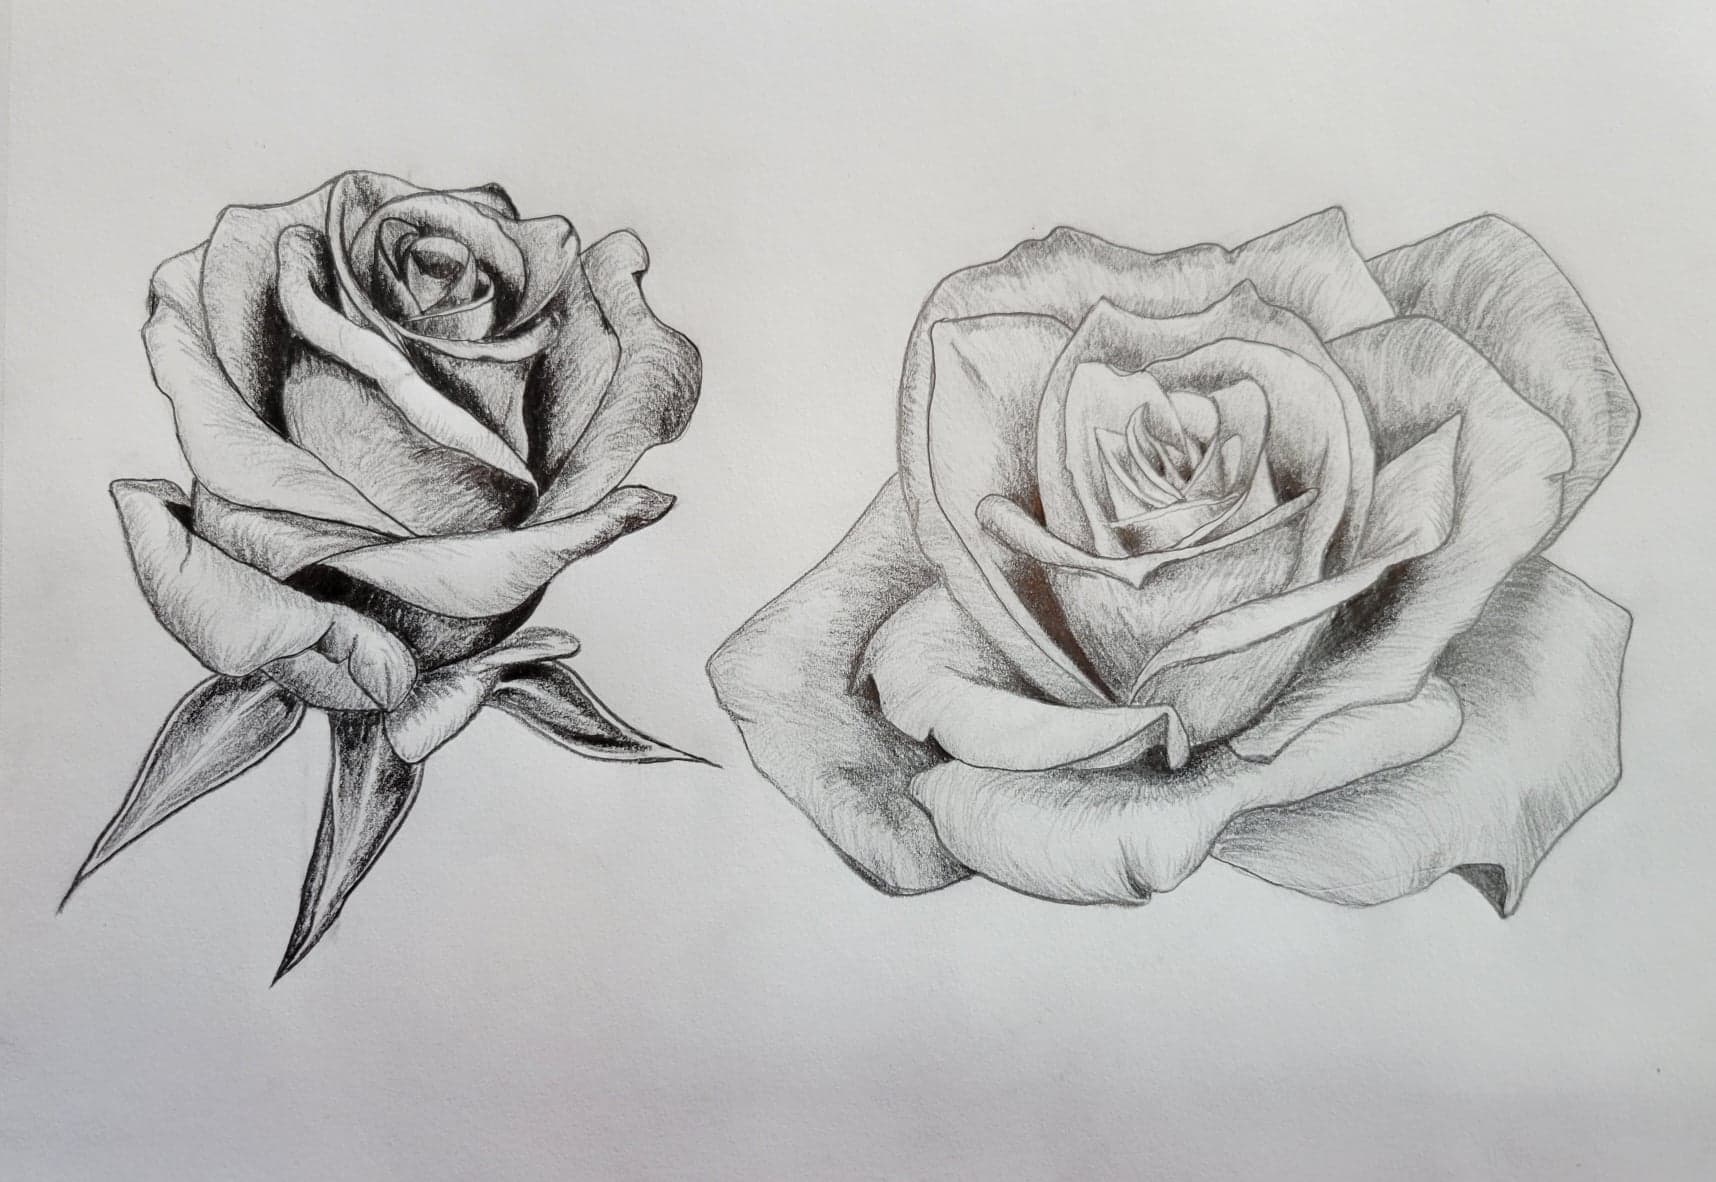 Kelsey's drawing of a rose